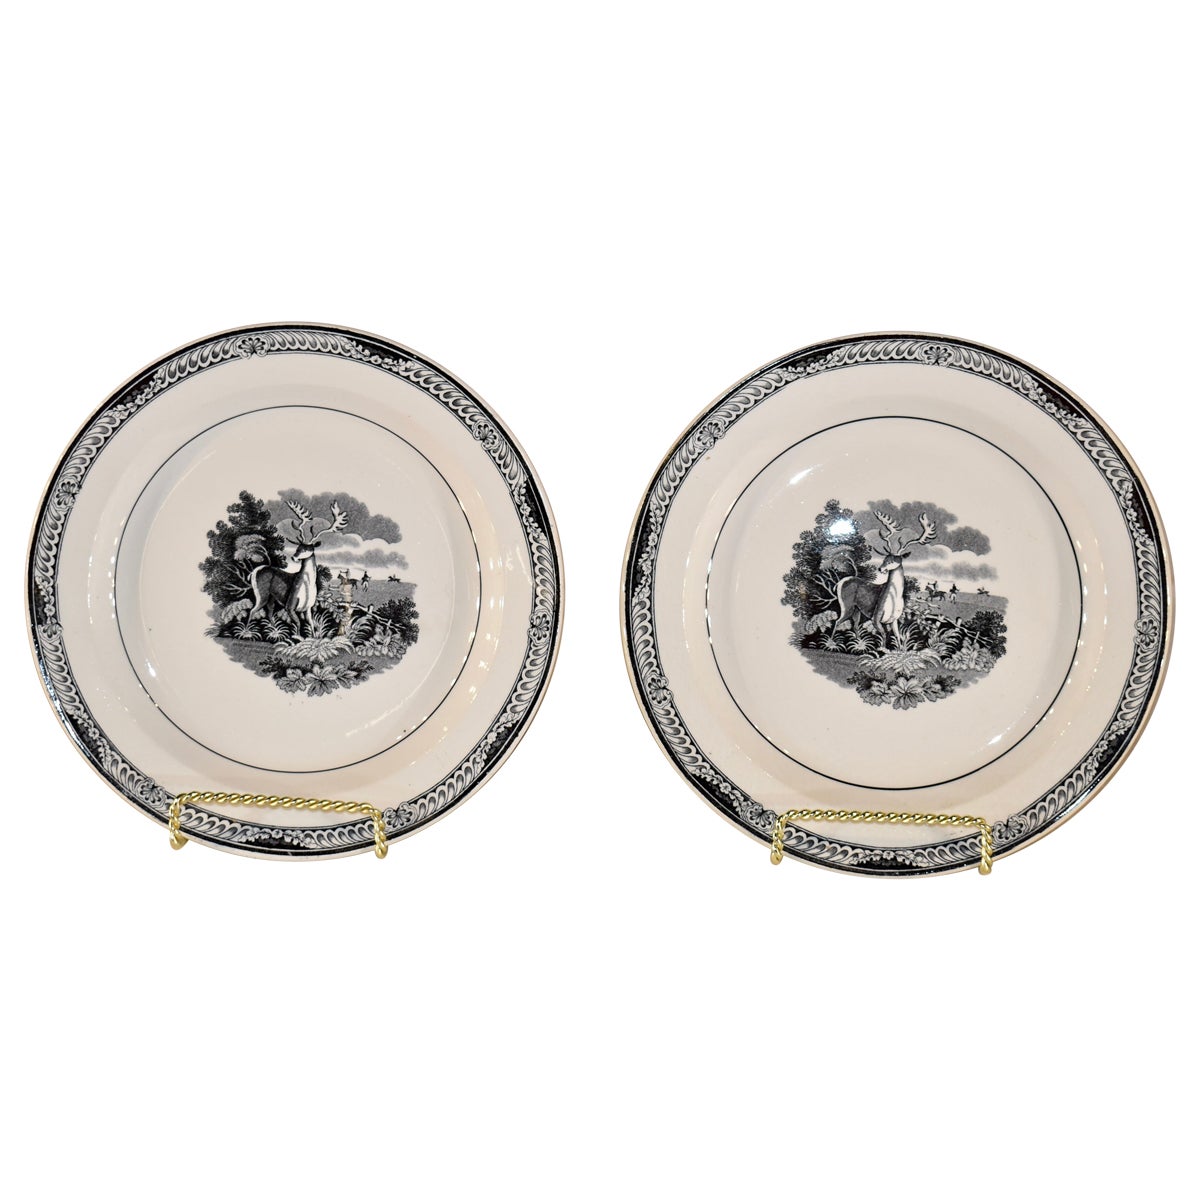 Pair of Early 19th Century Plates with Stags For Sale